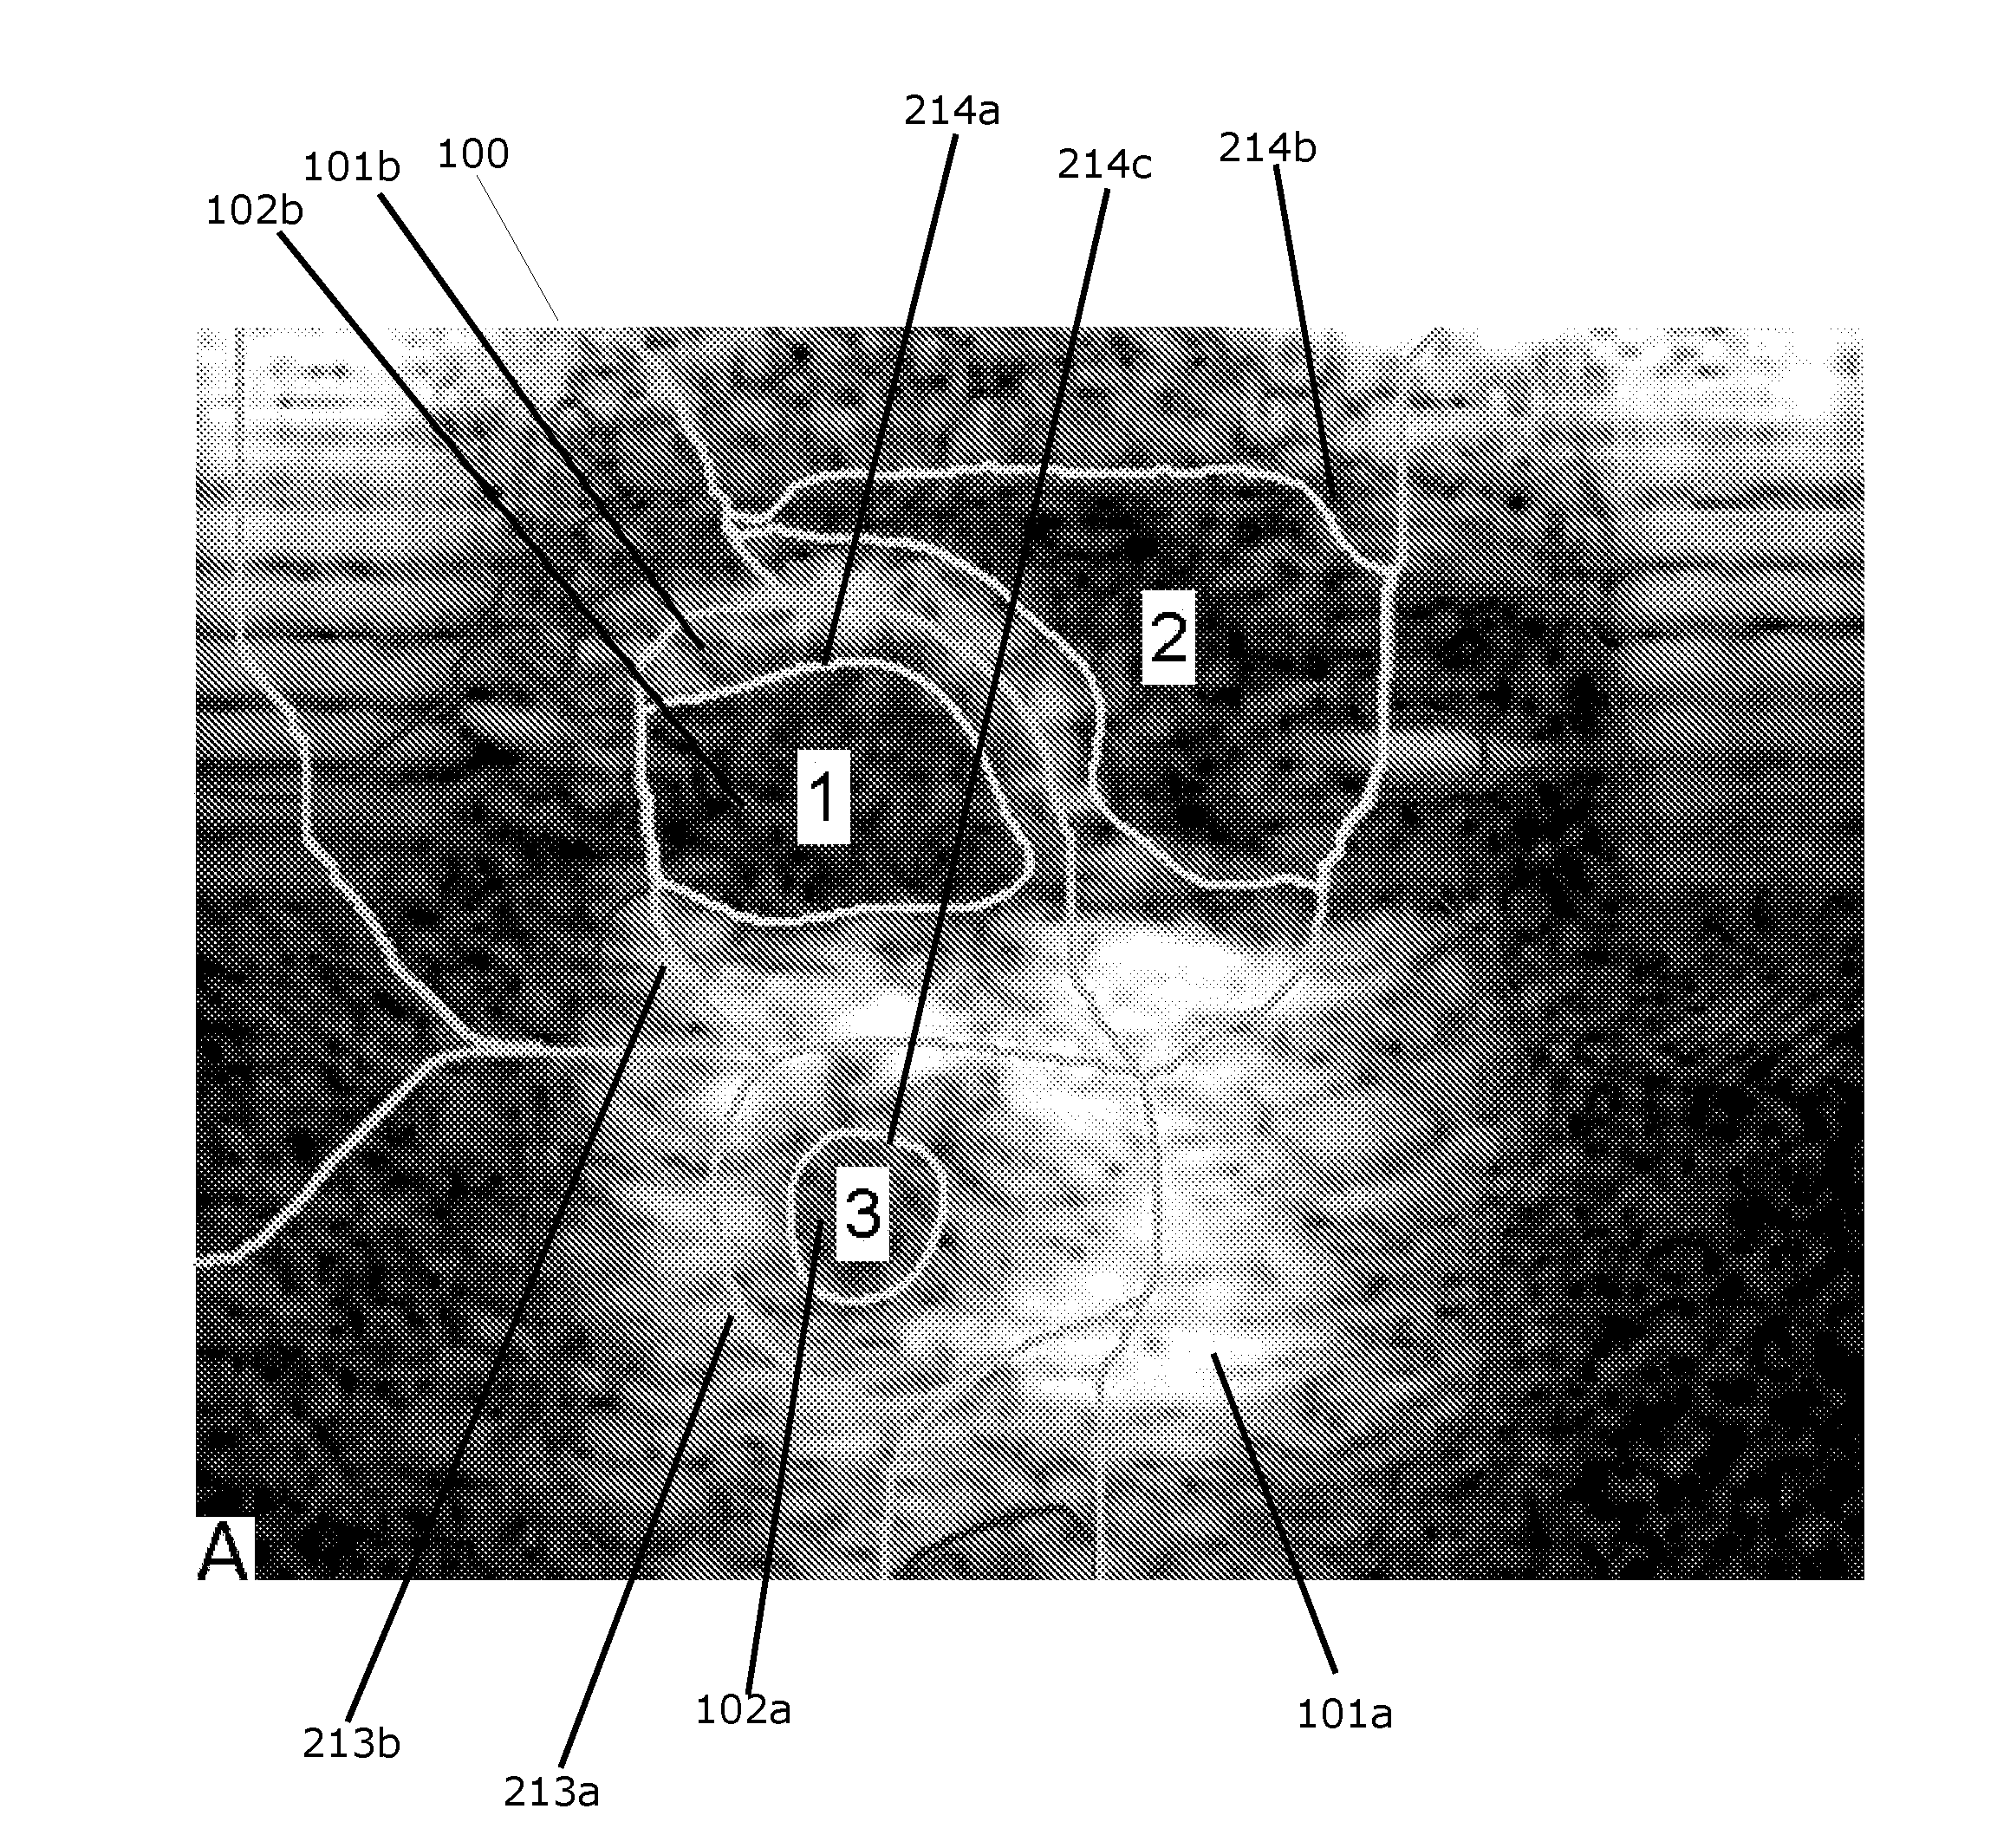 System for detecting blood vessel structures in medical images